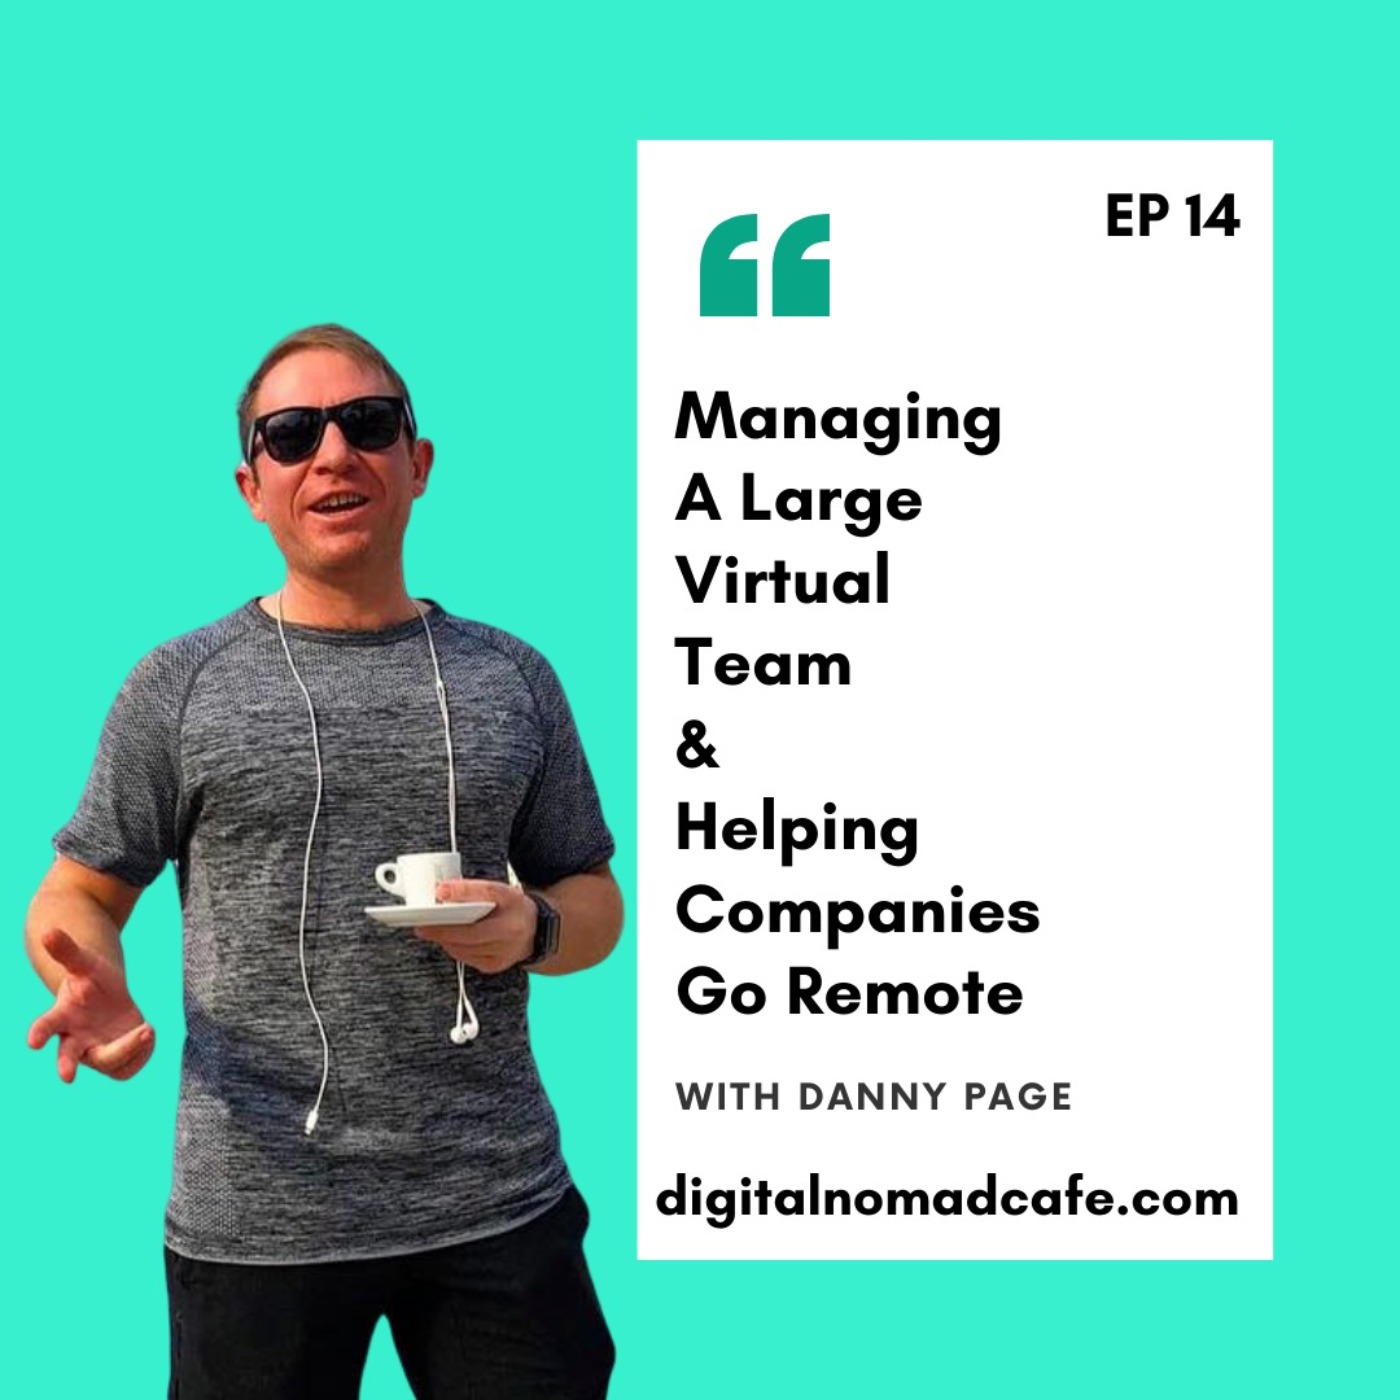 EP14: Managing A Large Virtual Team & Helping Companies Go Remote with Danny Page